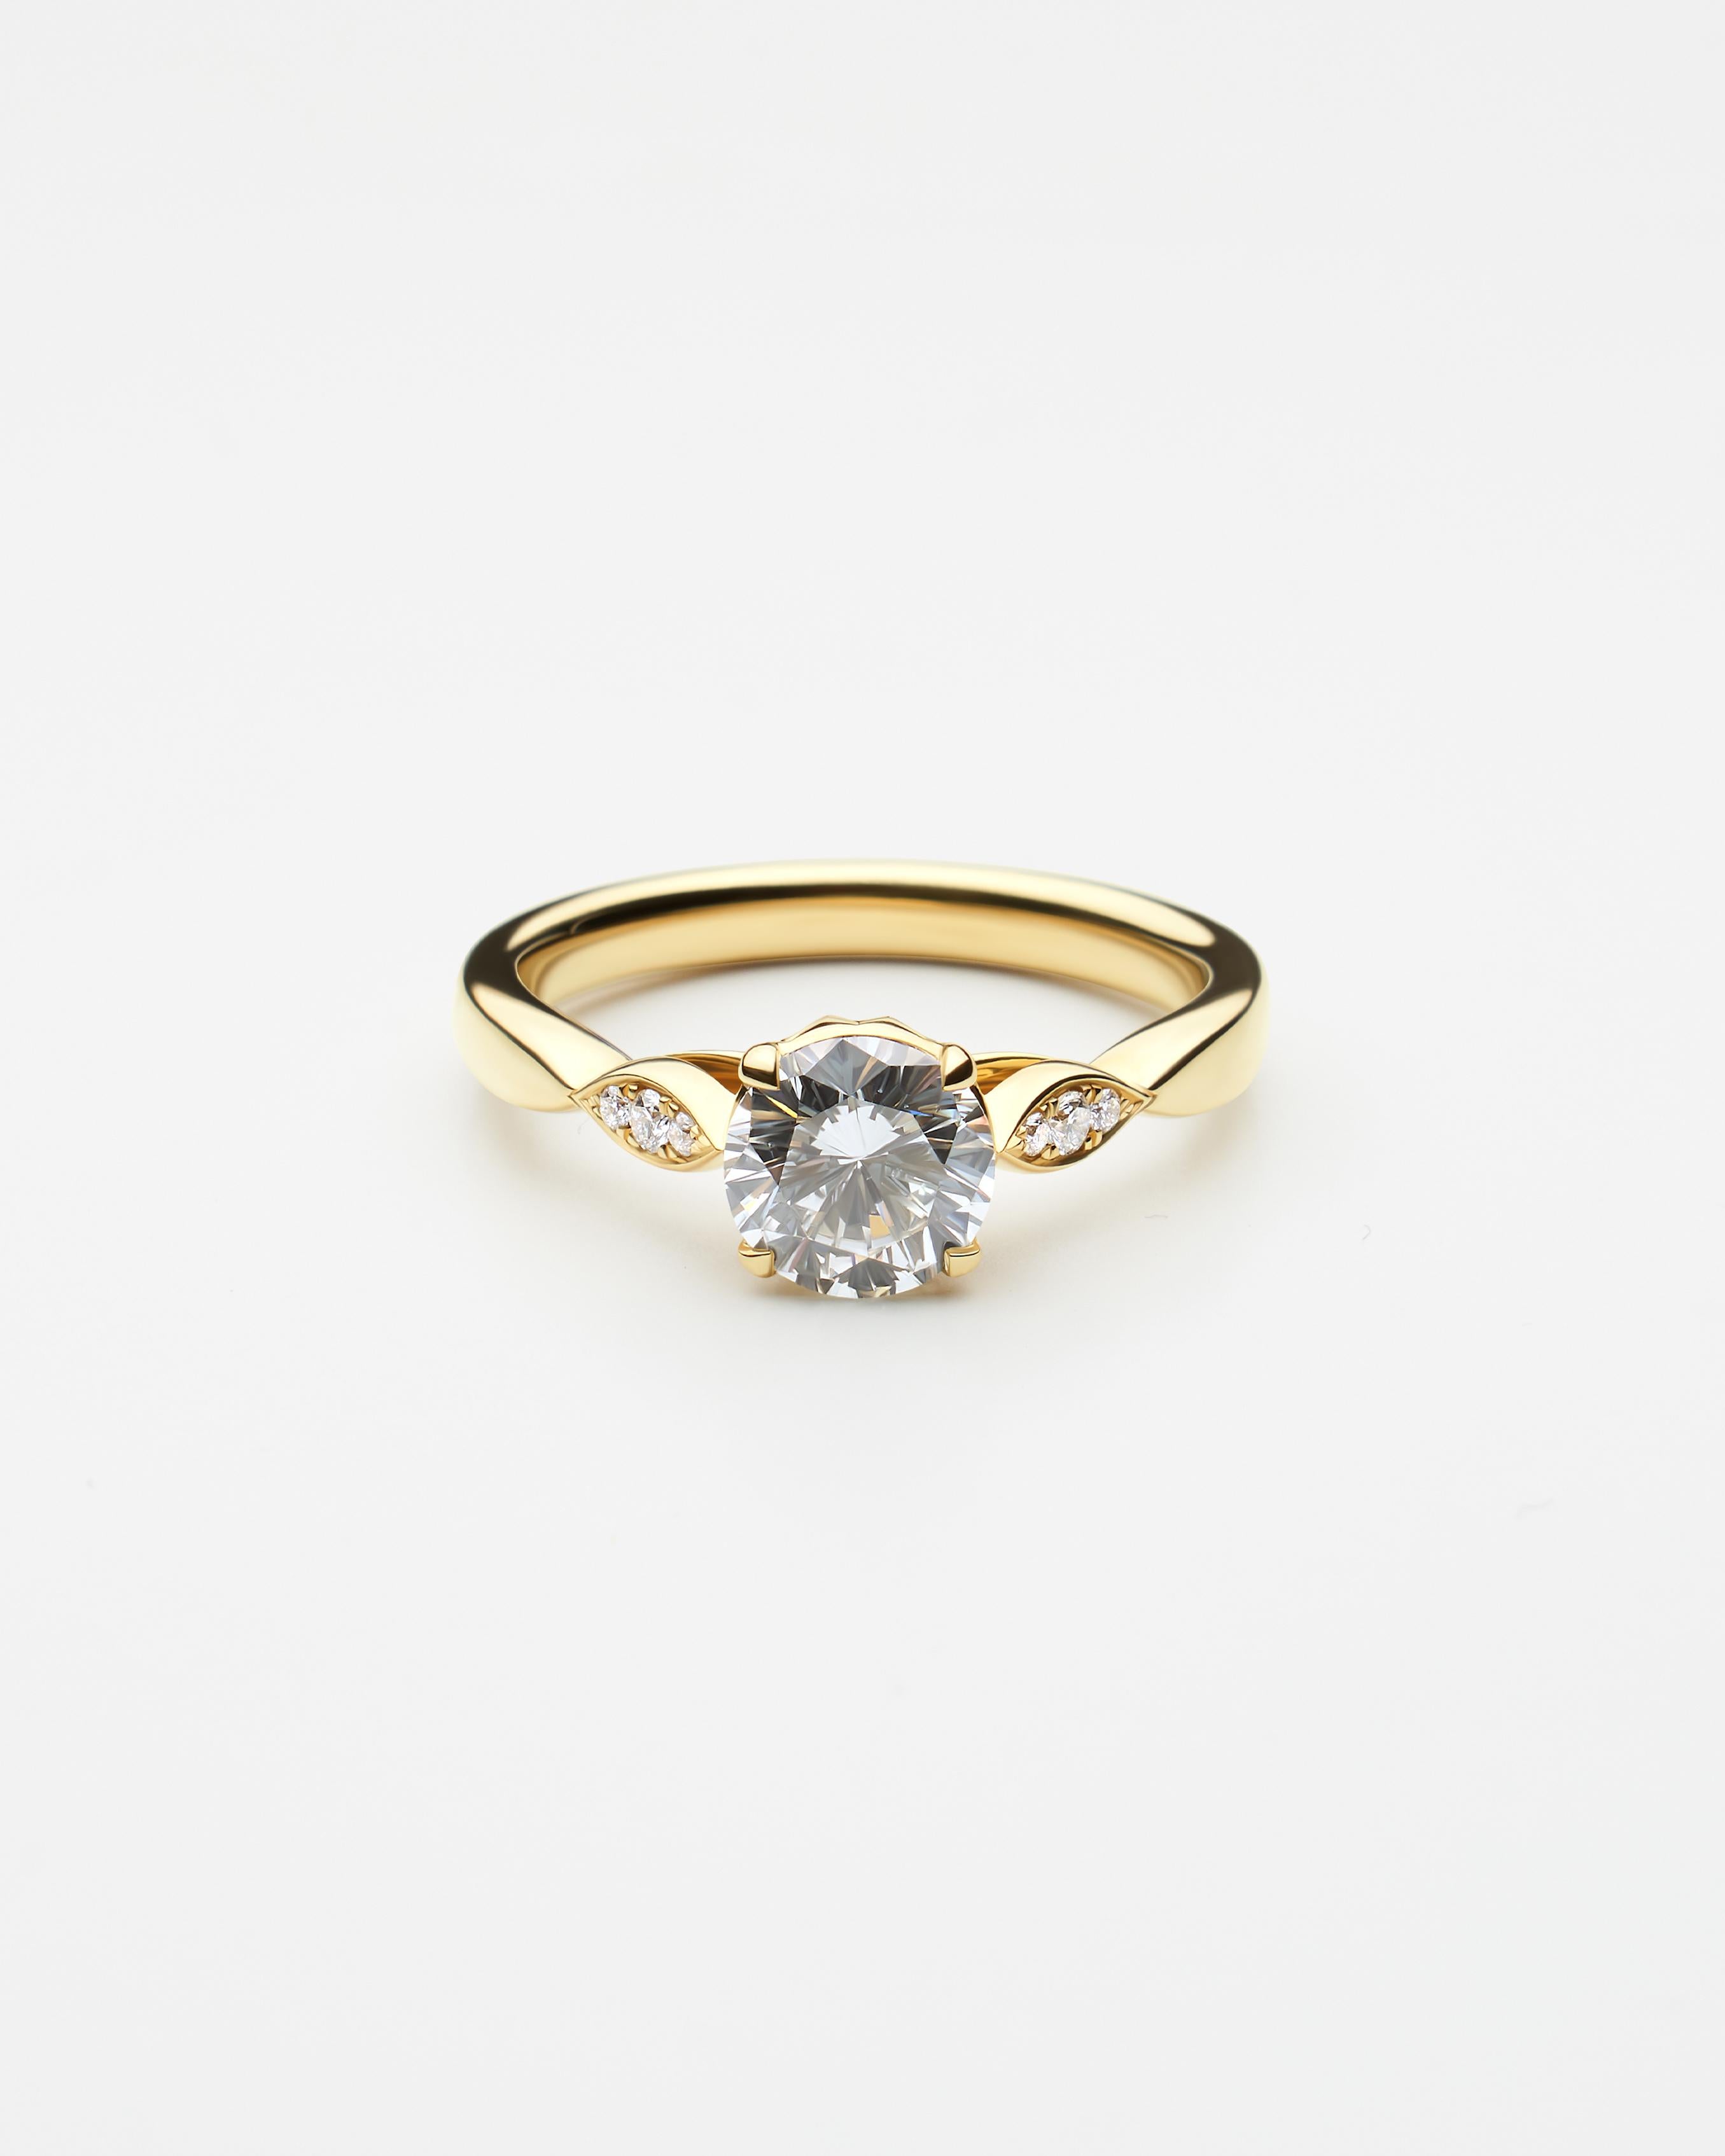 For Sale:  14k Yellow Gold Diamond Engagement Ring with 1.01 Carat Round Cut Diamond 2